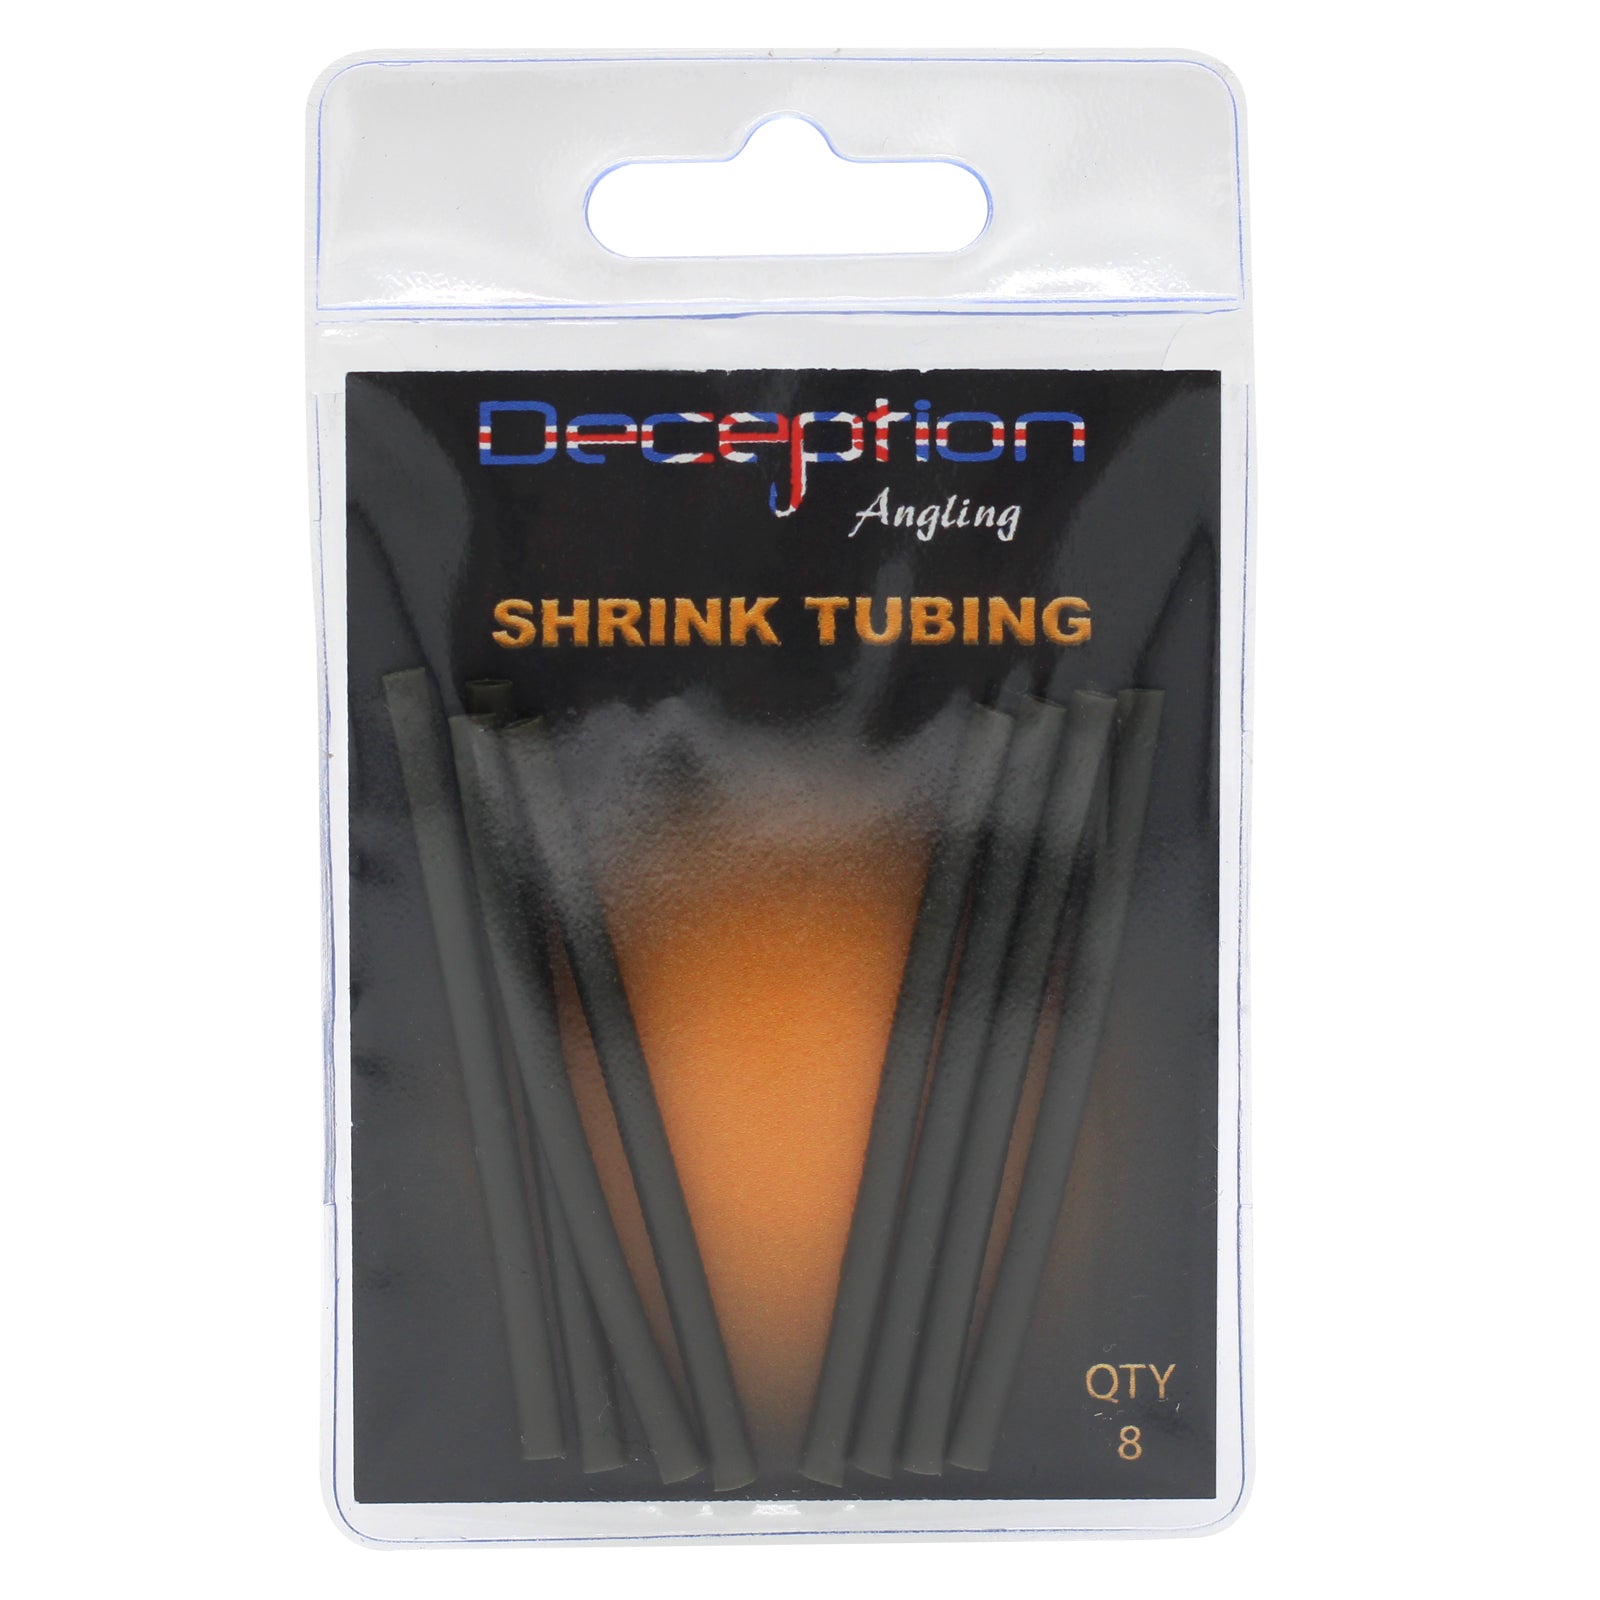 Deception Angling Shrink Tubing for Fishing Pack of 8